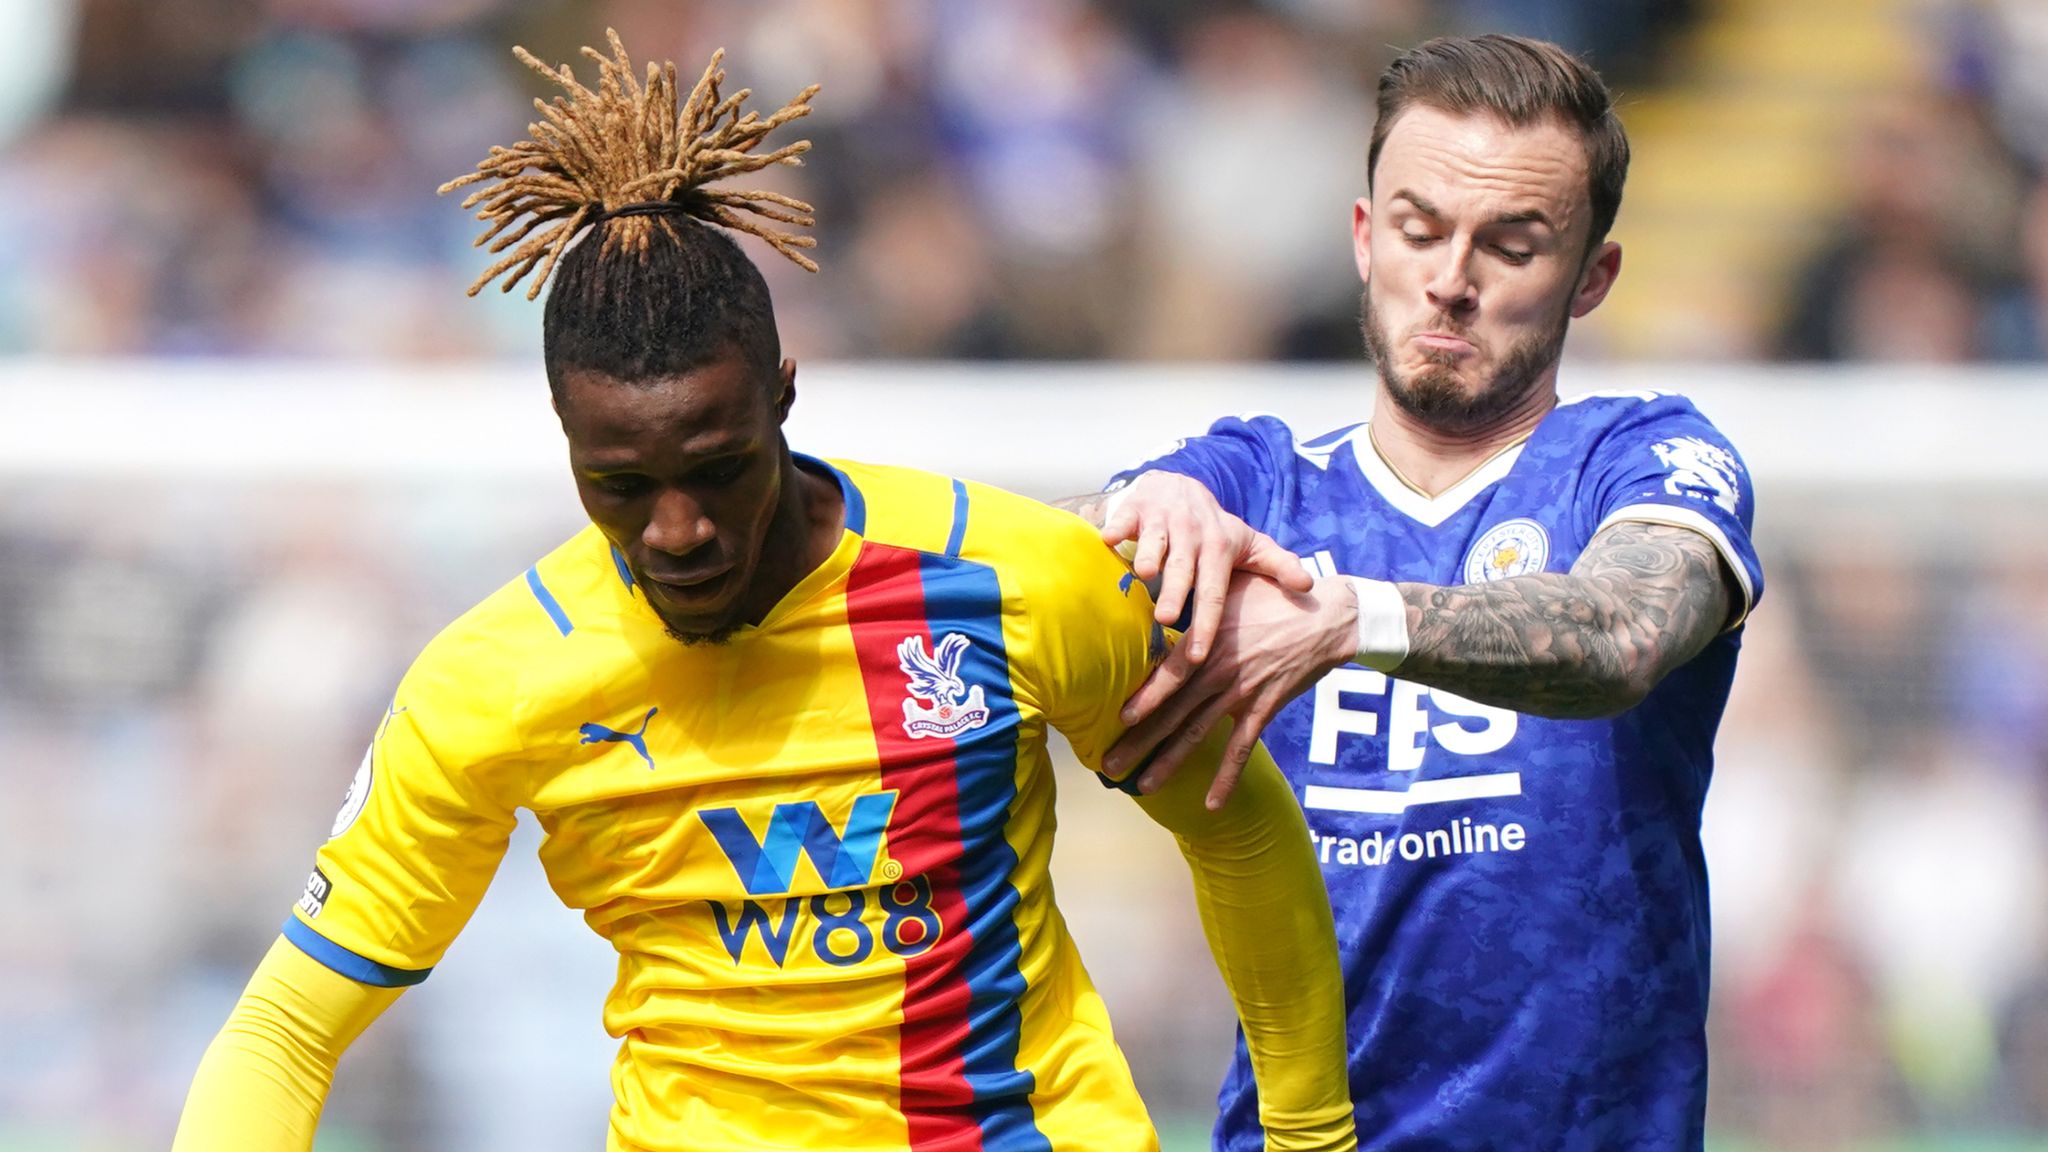 Leicester Vs Crystal Palace Live Mid Table Premier League Encounter At The King Power Stadium Football News Sky Sports